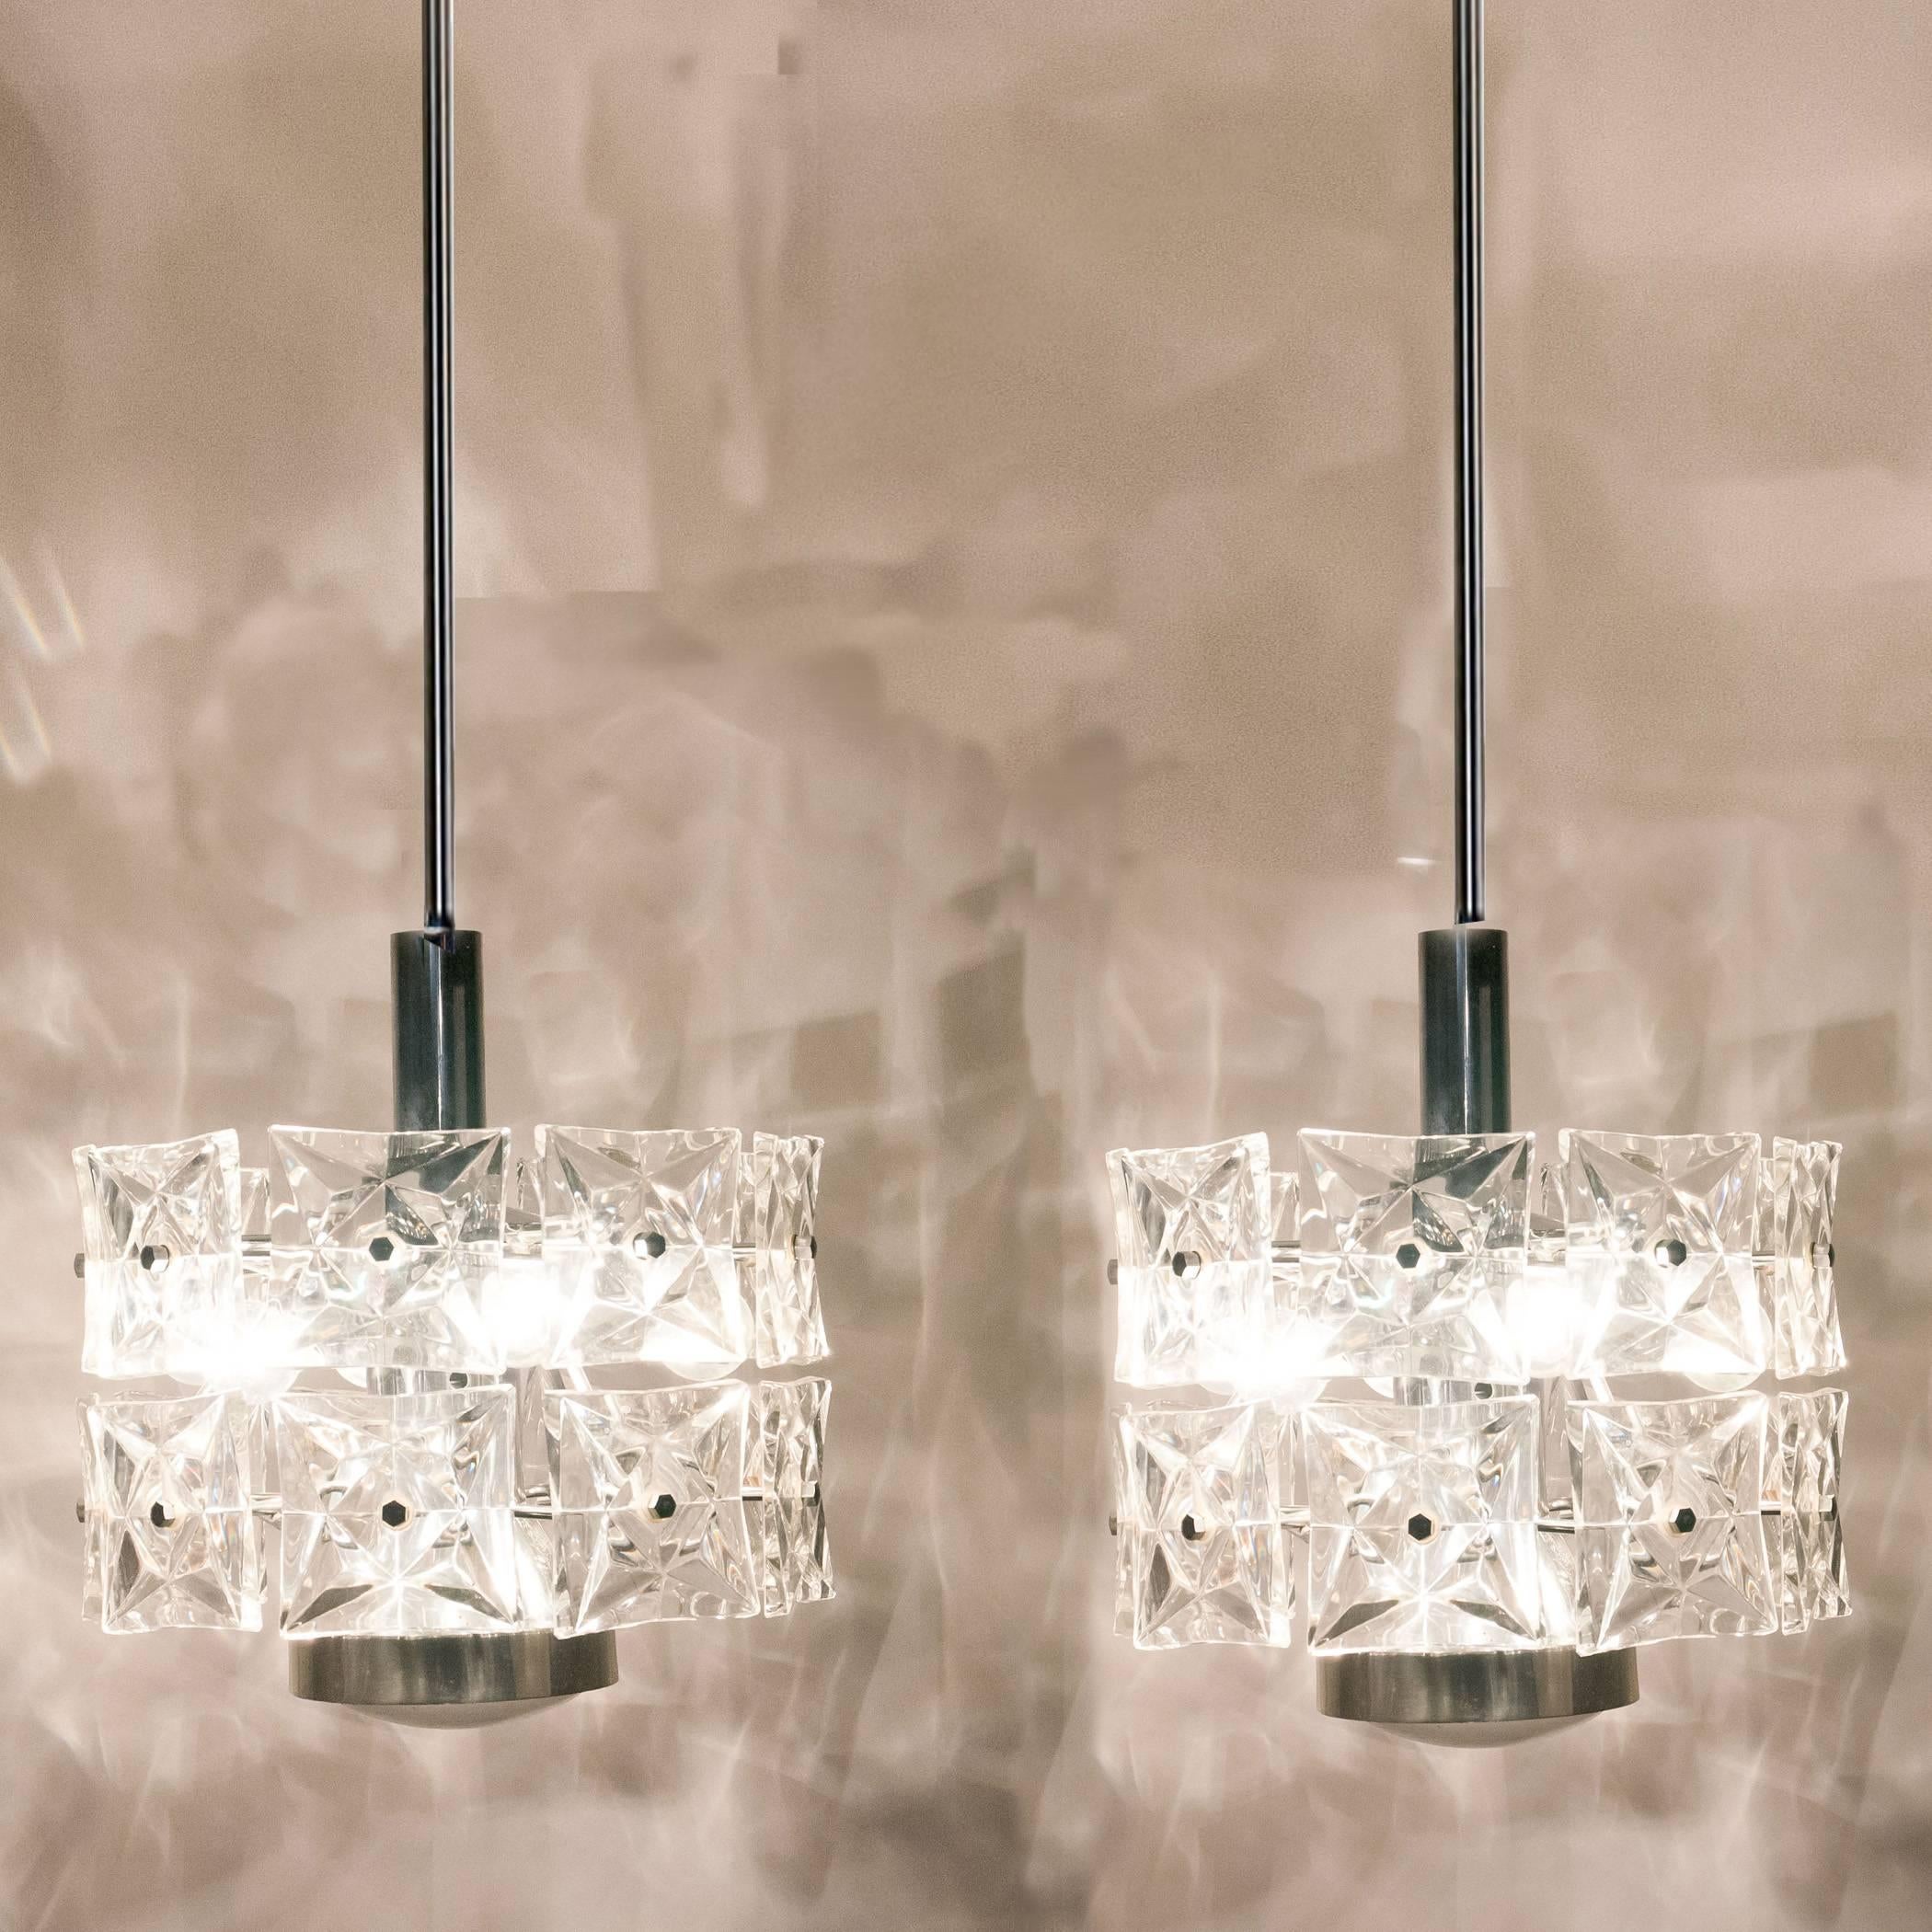 A pair of very modern, elegant and fine Kinkeldey chandeliers. Really heavy quality.They are comfortable with all decor periods. This chandeliers are executed to a very high standard. The quality large square crystals beautifully reflecting the